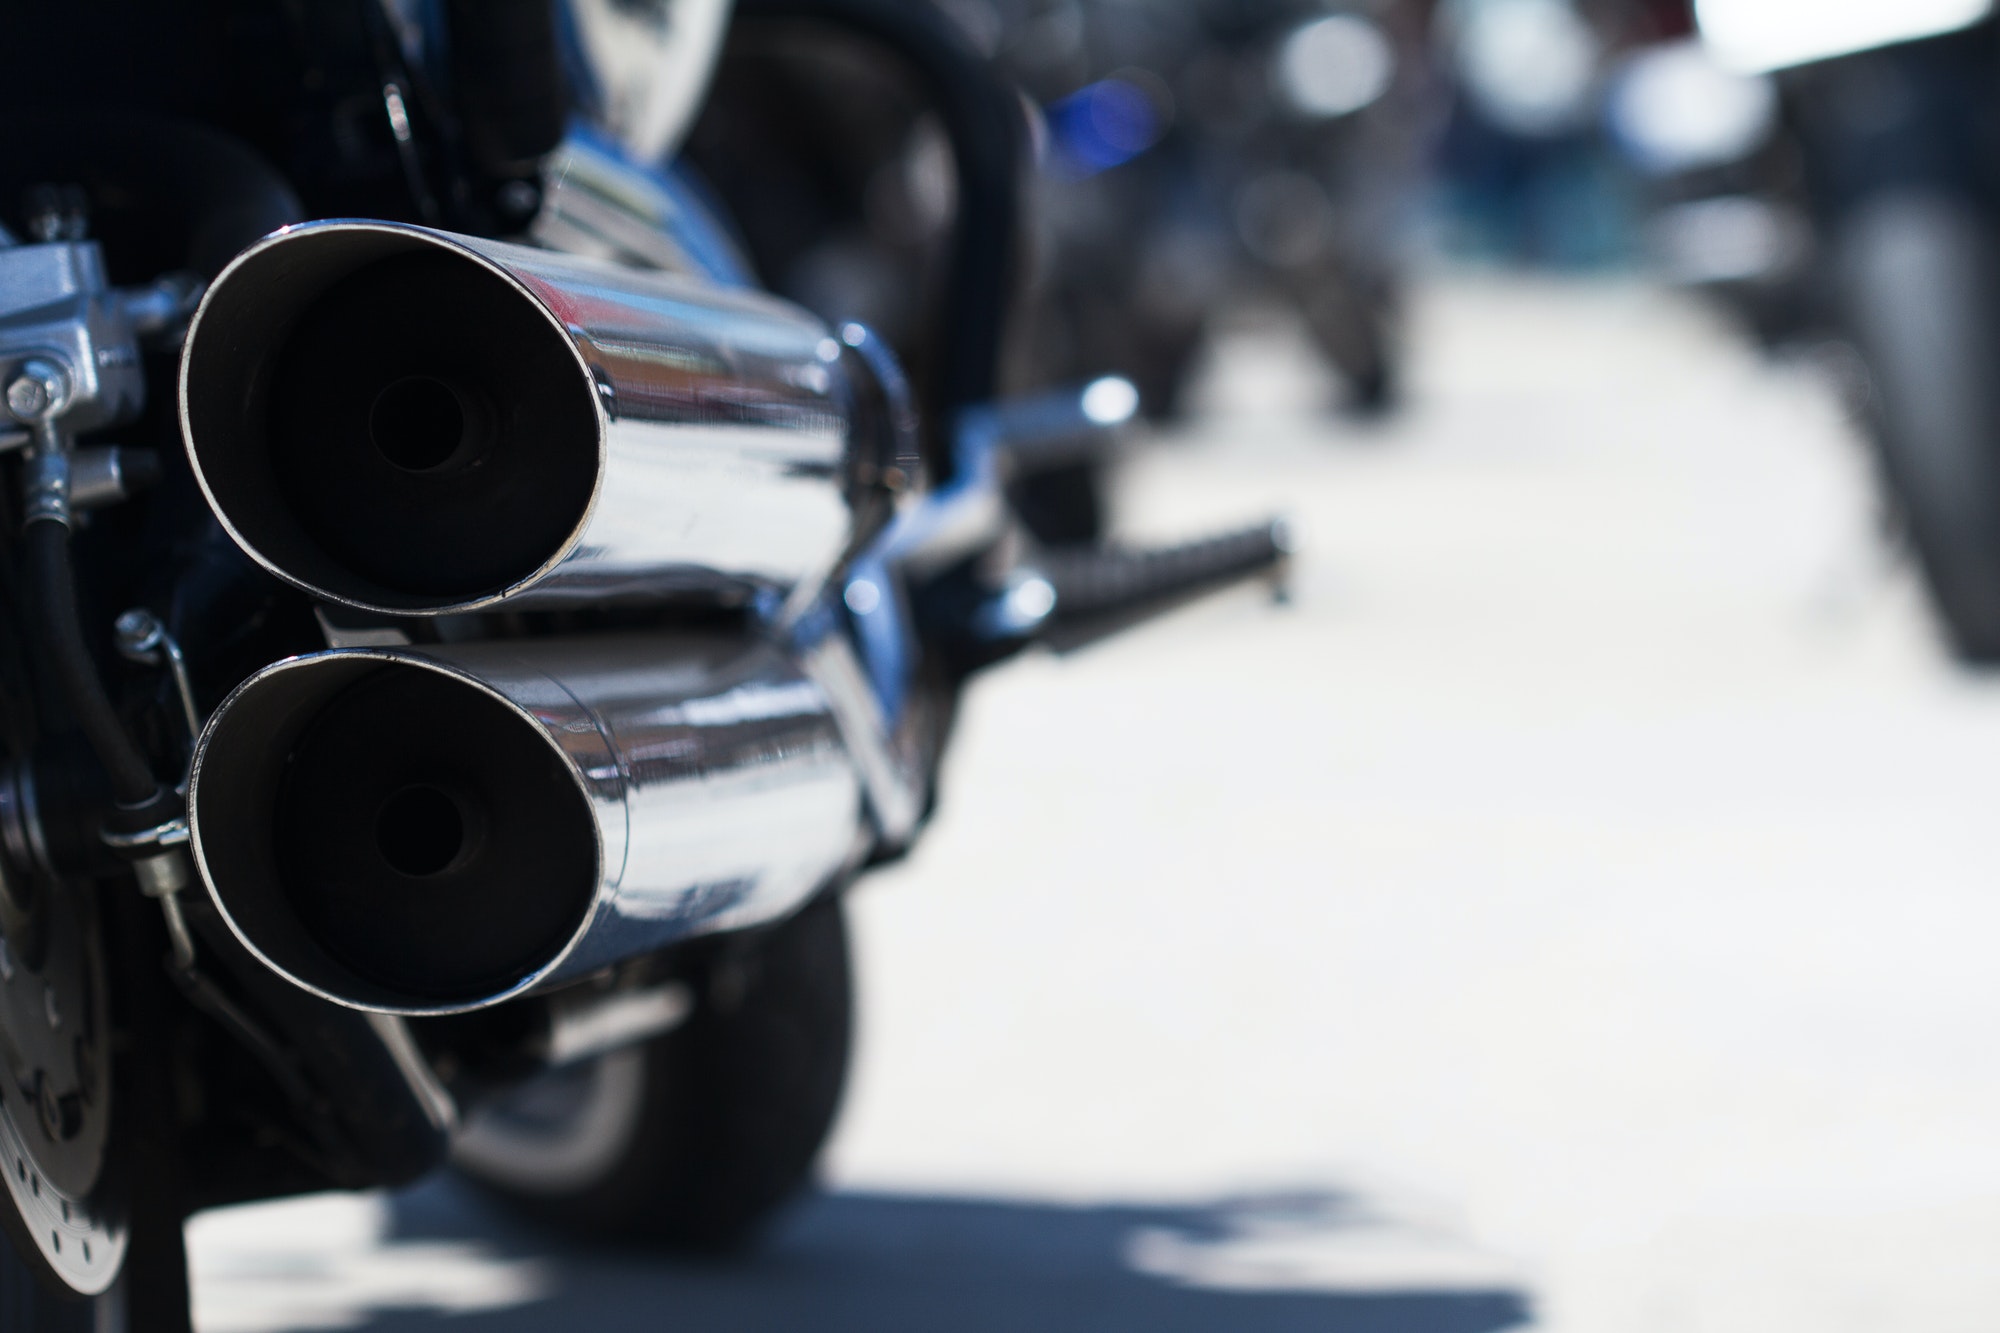 motorcycle rear exhaust pipes detail